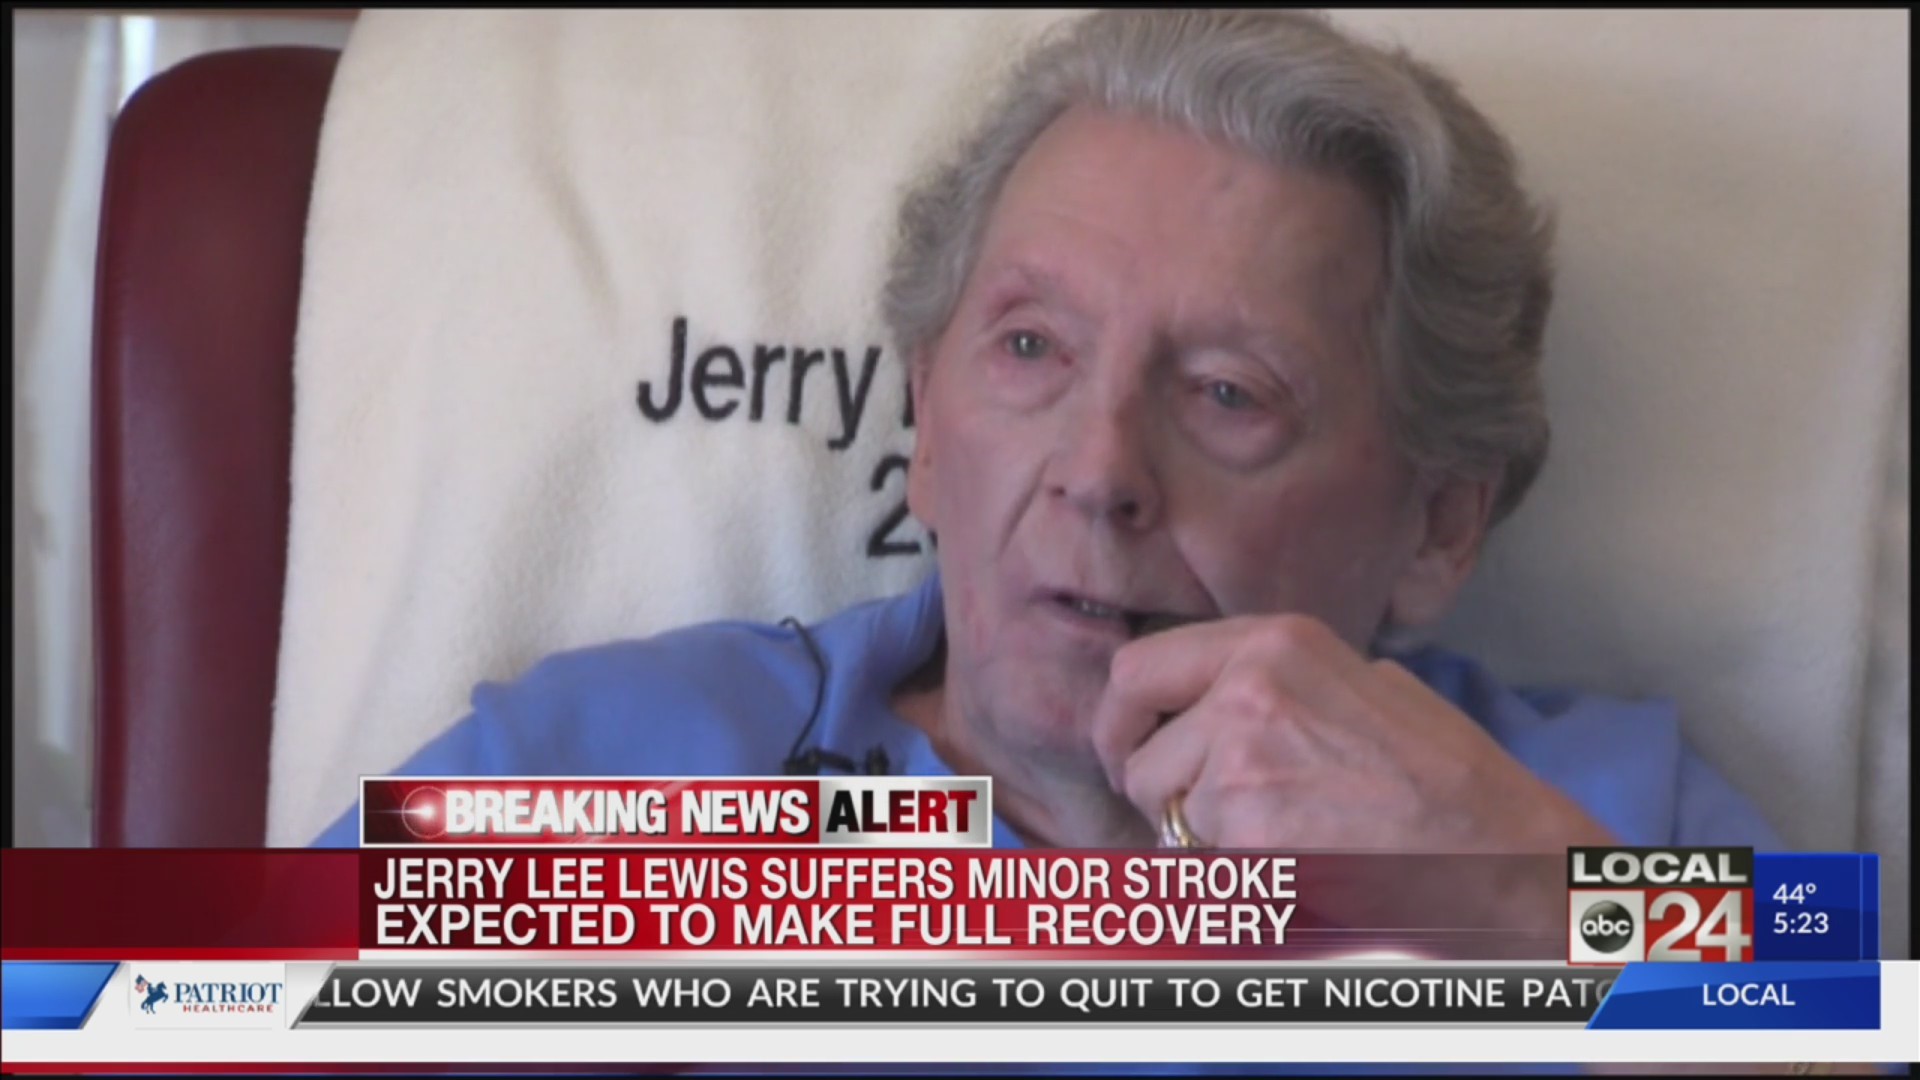 Jerry Lee Lewis Suffers Minor Stroke, Full Recovery Expected ...